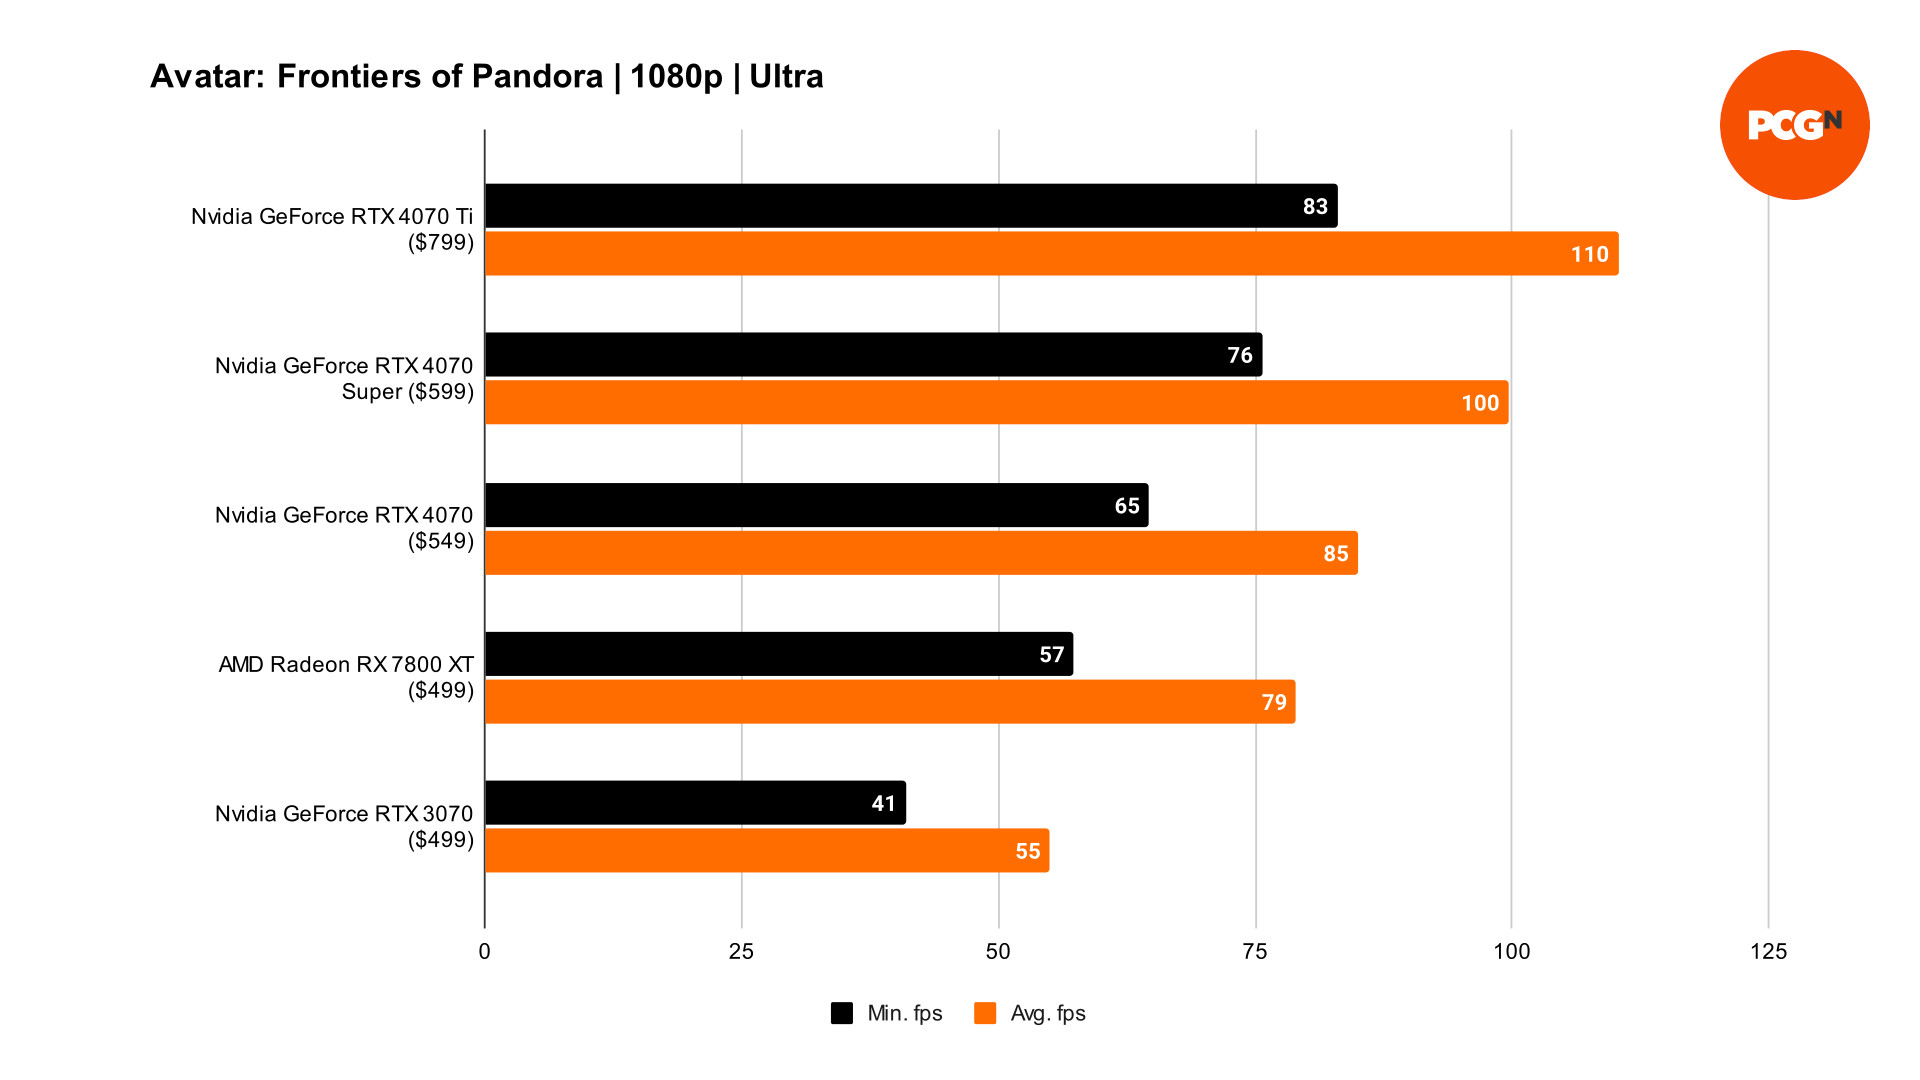 Nvidia GeForce RTX 4070 Super Avatar Frontiers of Pandora 1080p benchmarks